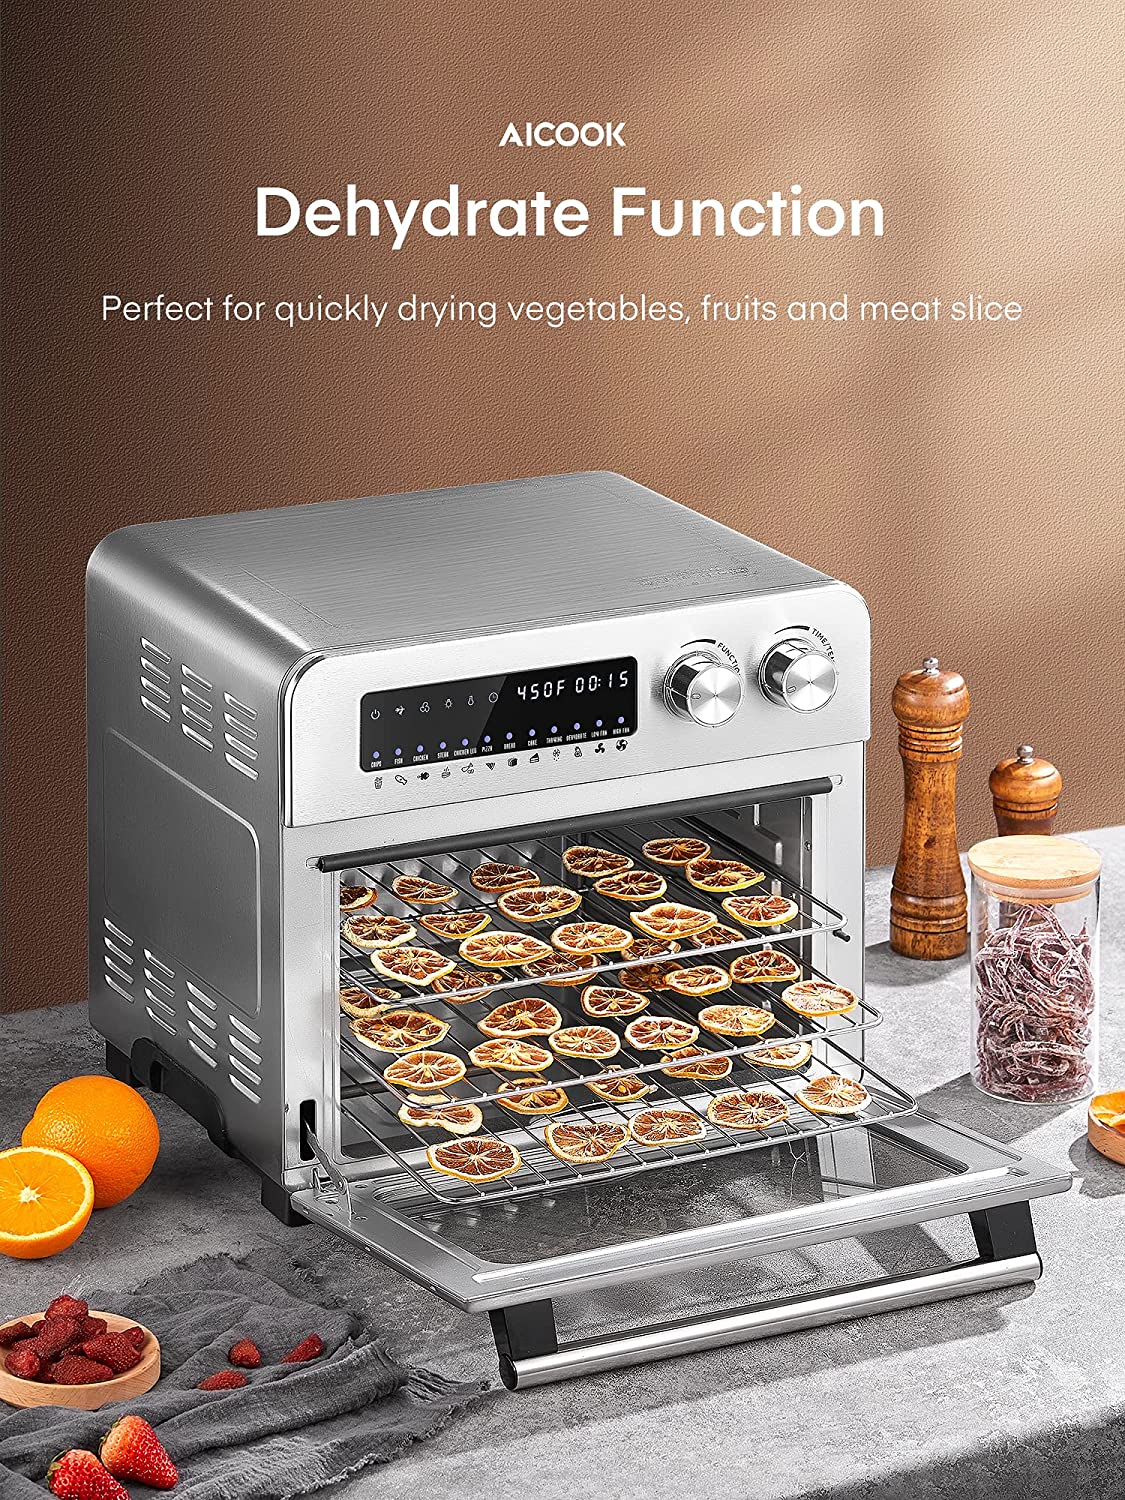 AICOOK Air Fryer Oven 24 QT, 12-in-1 Air Fryer 1700W Digital Large Convection Oven with Rotisserie and Dehydrator for Chicken, French Fries and Pizza, Air fryer Toaster Oven Include 8 Accessories, dehydrate function with oven